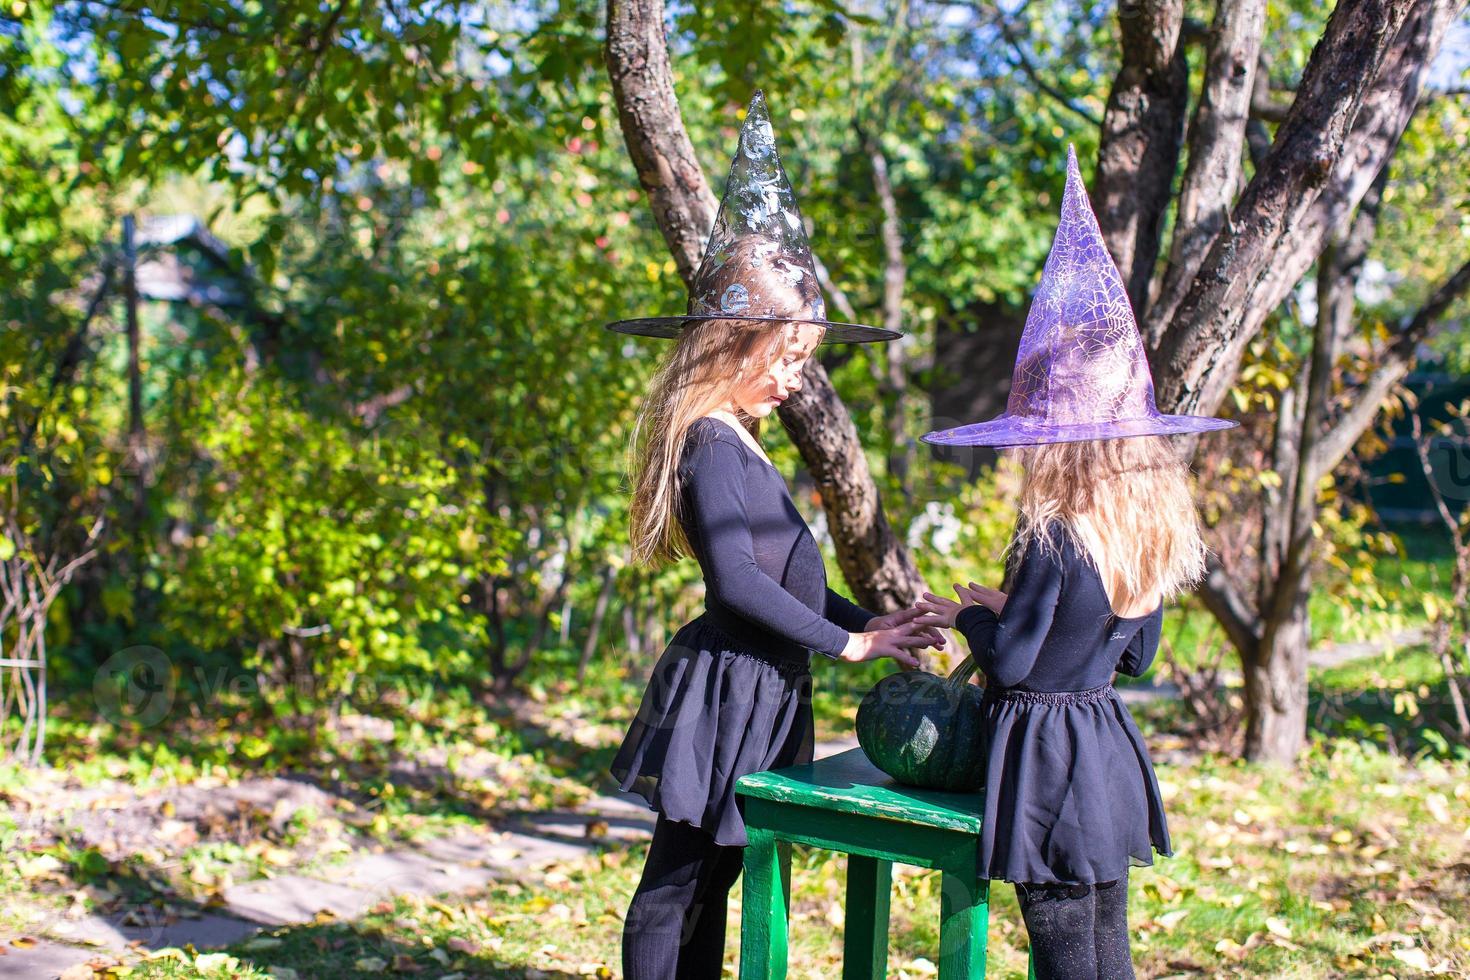 Little girls casting a spell on Halloween in witch costume photo